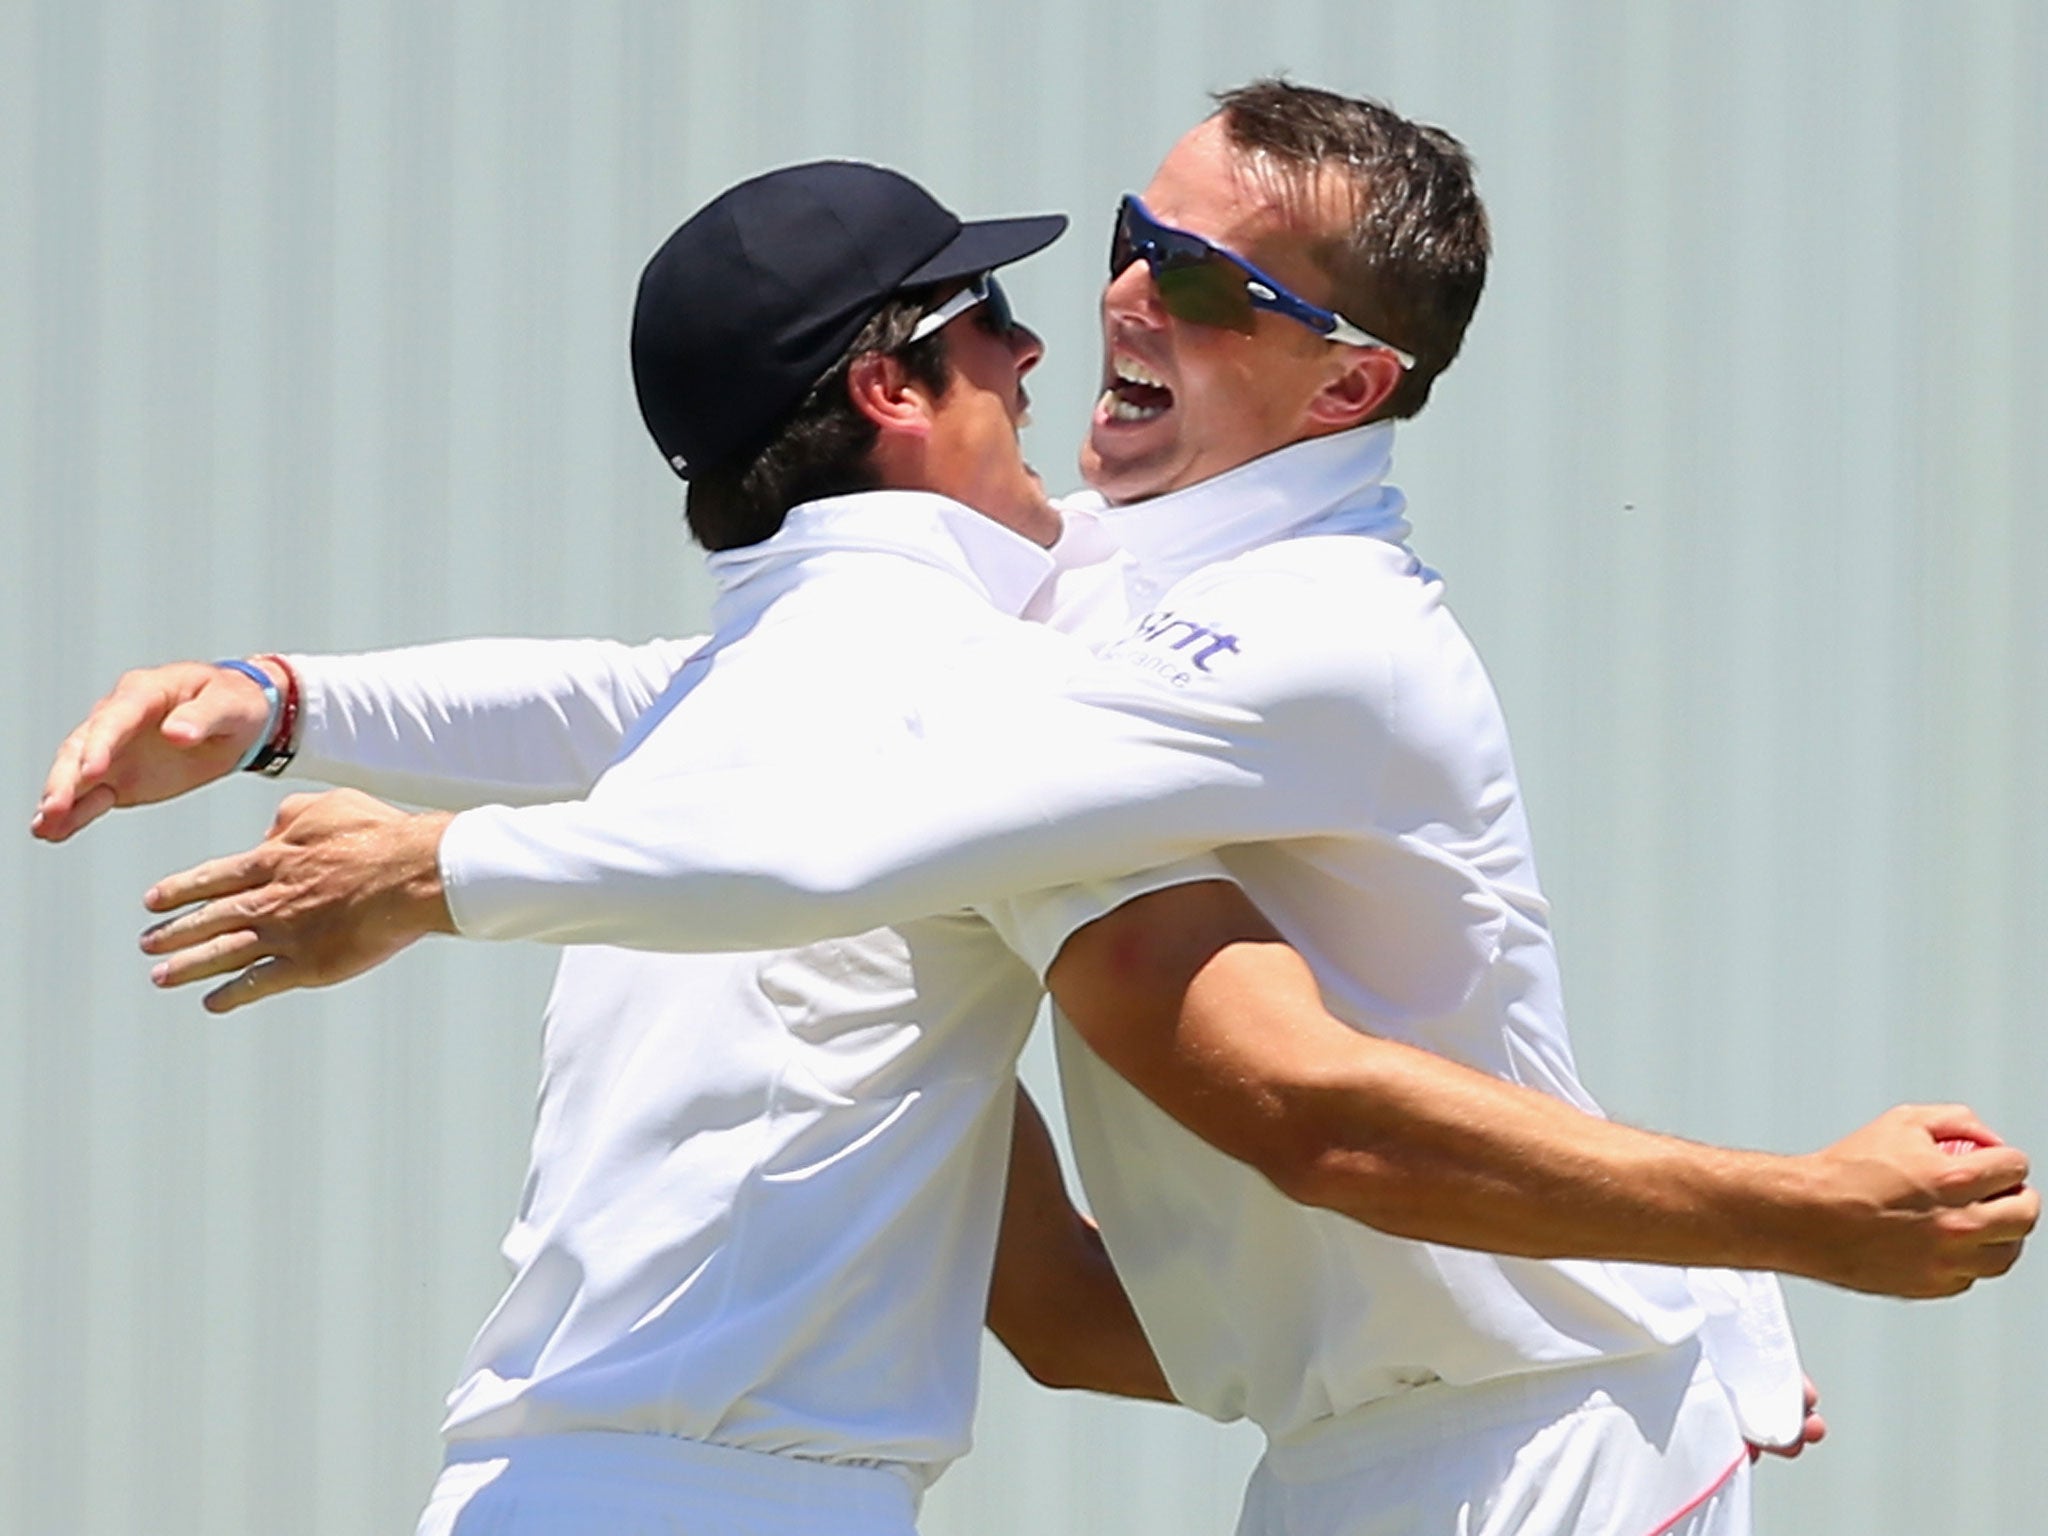 Alastair Cook and Graeme Swann celebrate during the 2013-14 Ashes Series in Australia